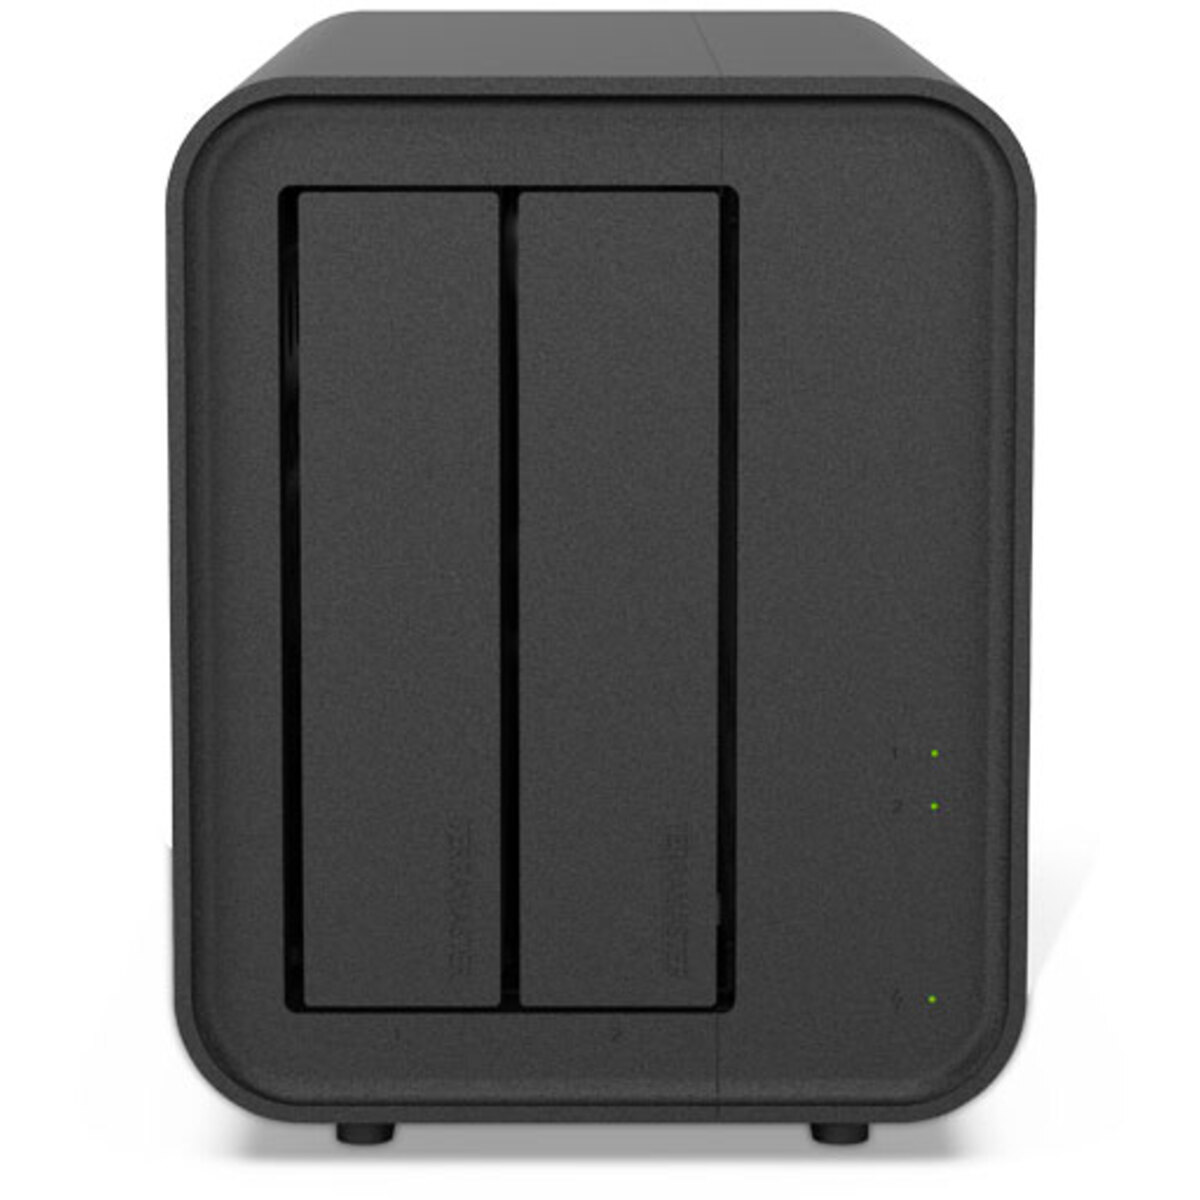 TerraMaster D5 Hybrid 16tb 2-Bay Desktop Multimedia / Power User / Business DAS - Direct Attached Storage Device 2x8tb Samsung 870 QVO MZ-77Q8T0 2.5 560/530MB/s SATA 6Gb/s SSD CONSUMER Class Drives Installed - Burn-In Tested D5 Hybrid